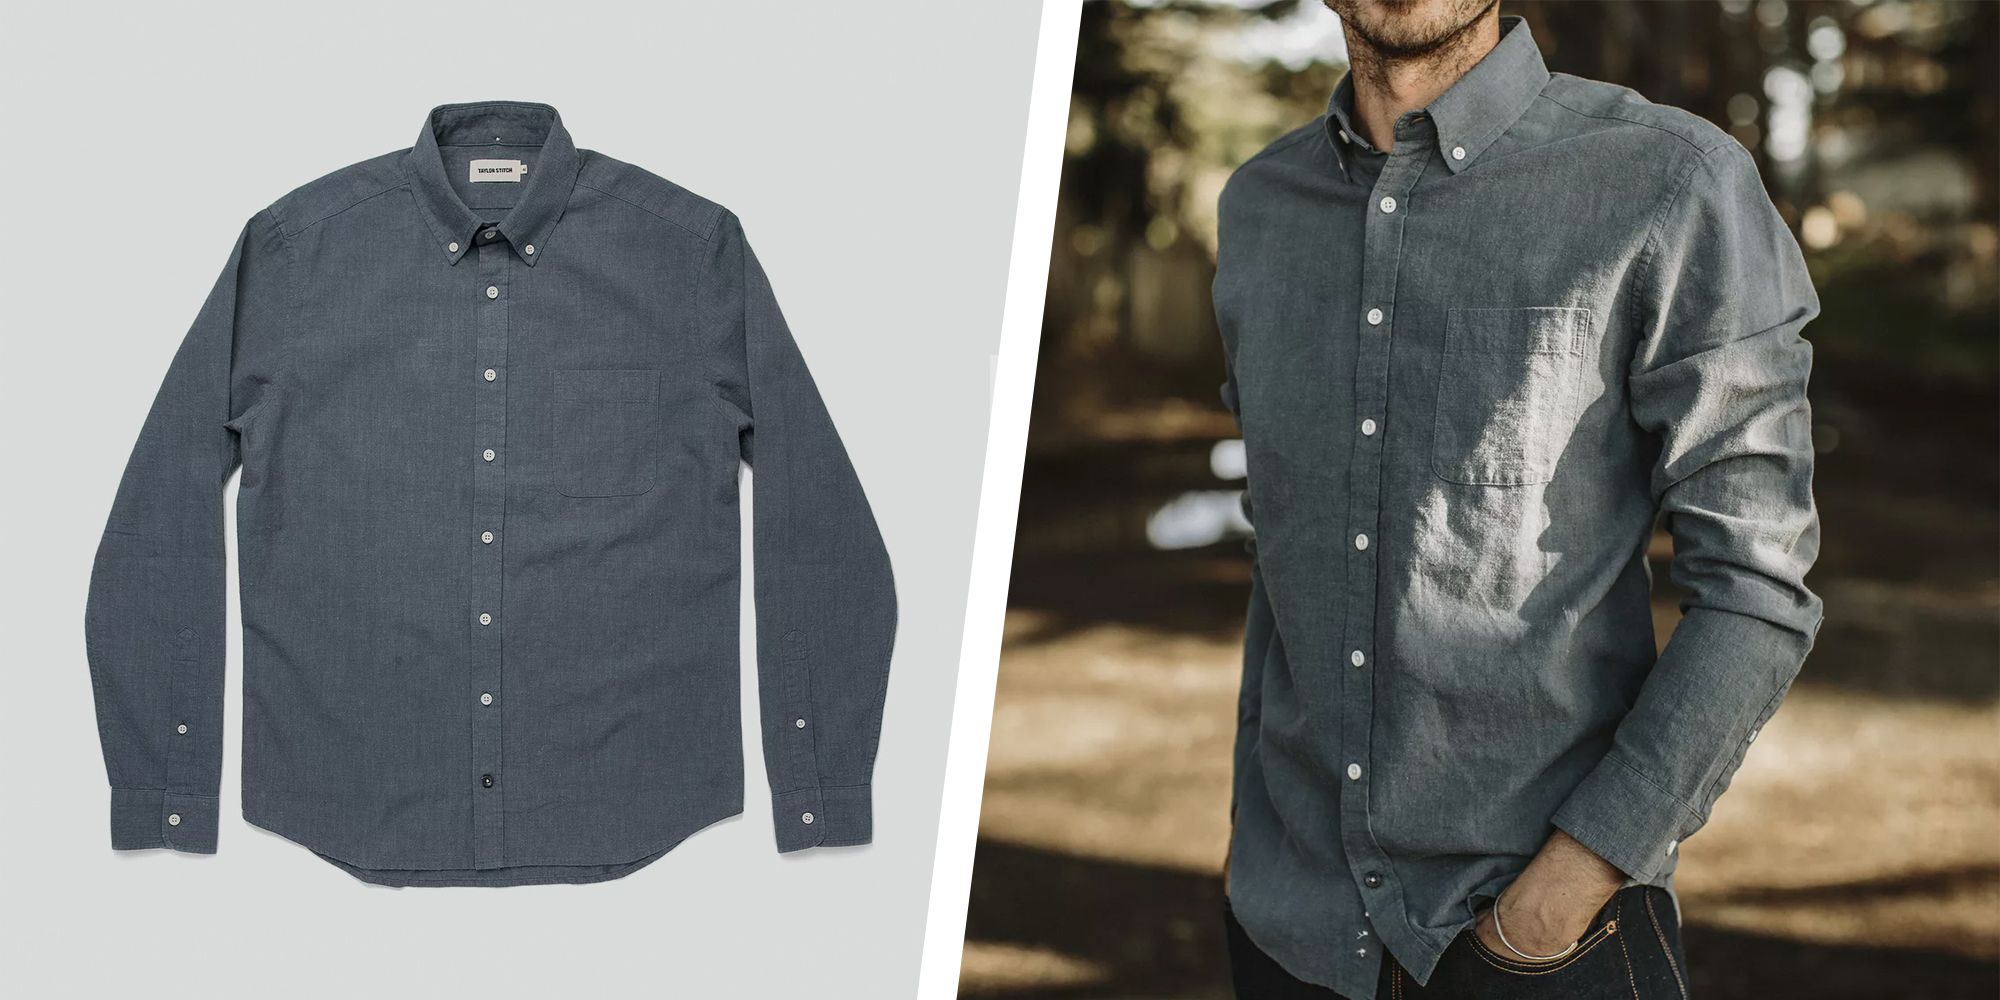 10 Best Button-Down Shirts for Men 2021 